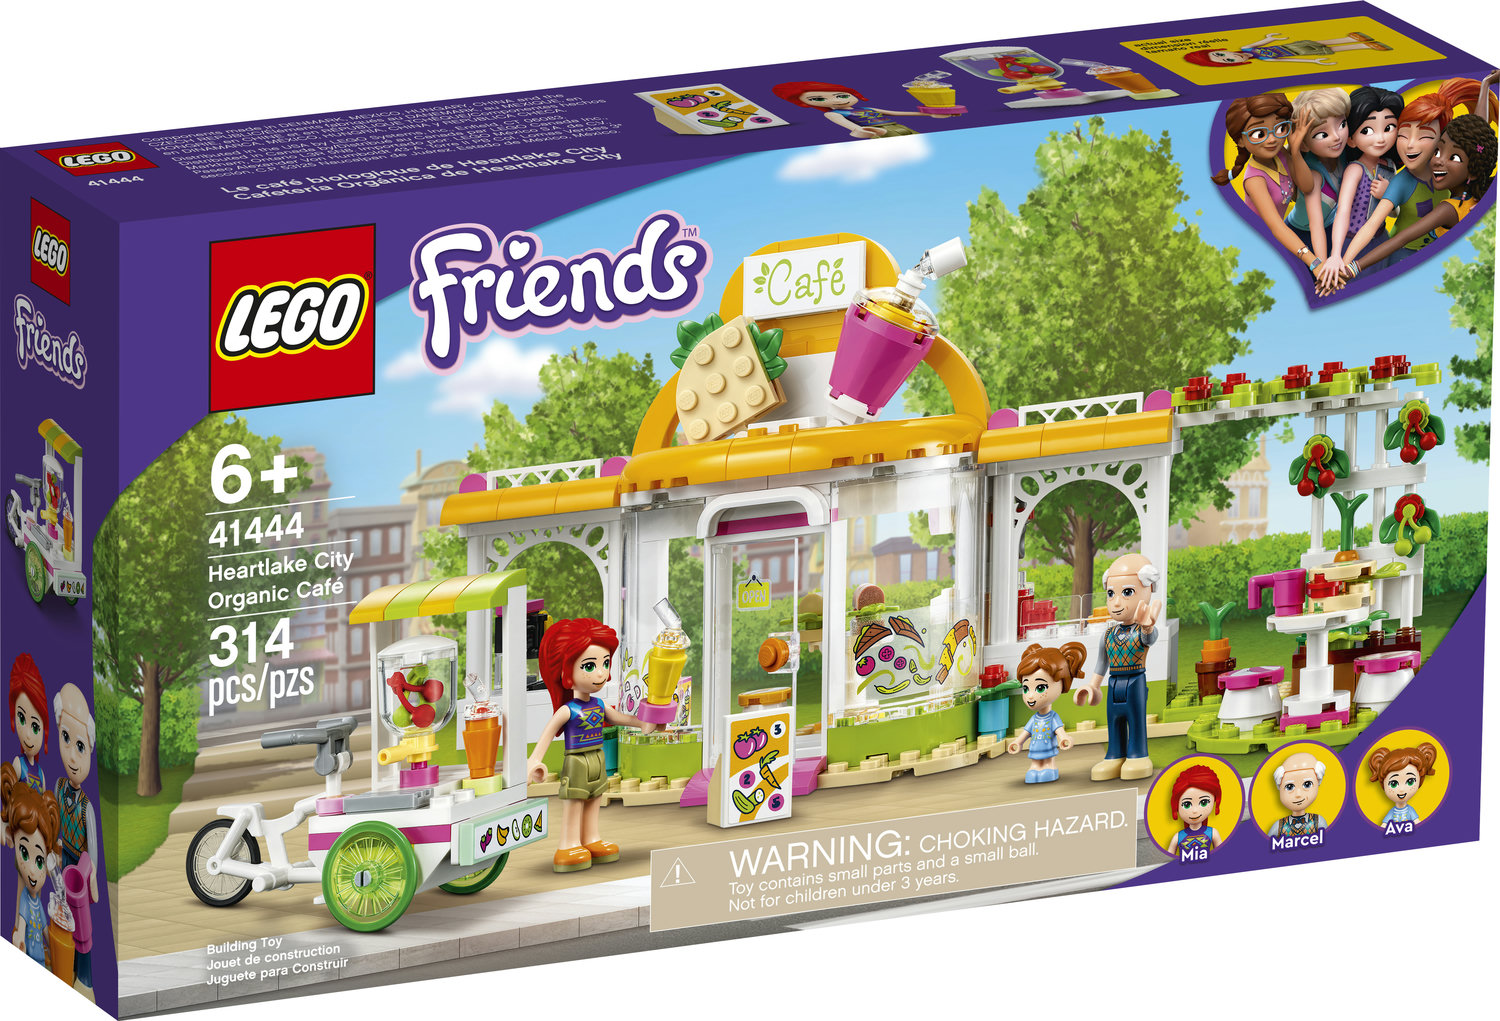 LEGO Friends Heartlake City Organic Café 41444 Building Toy; Comes with LEGO Friends Mia (314 Pieces) - image 4 of 10